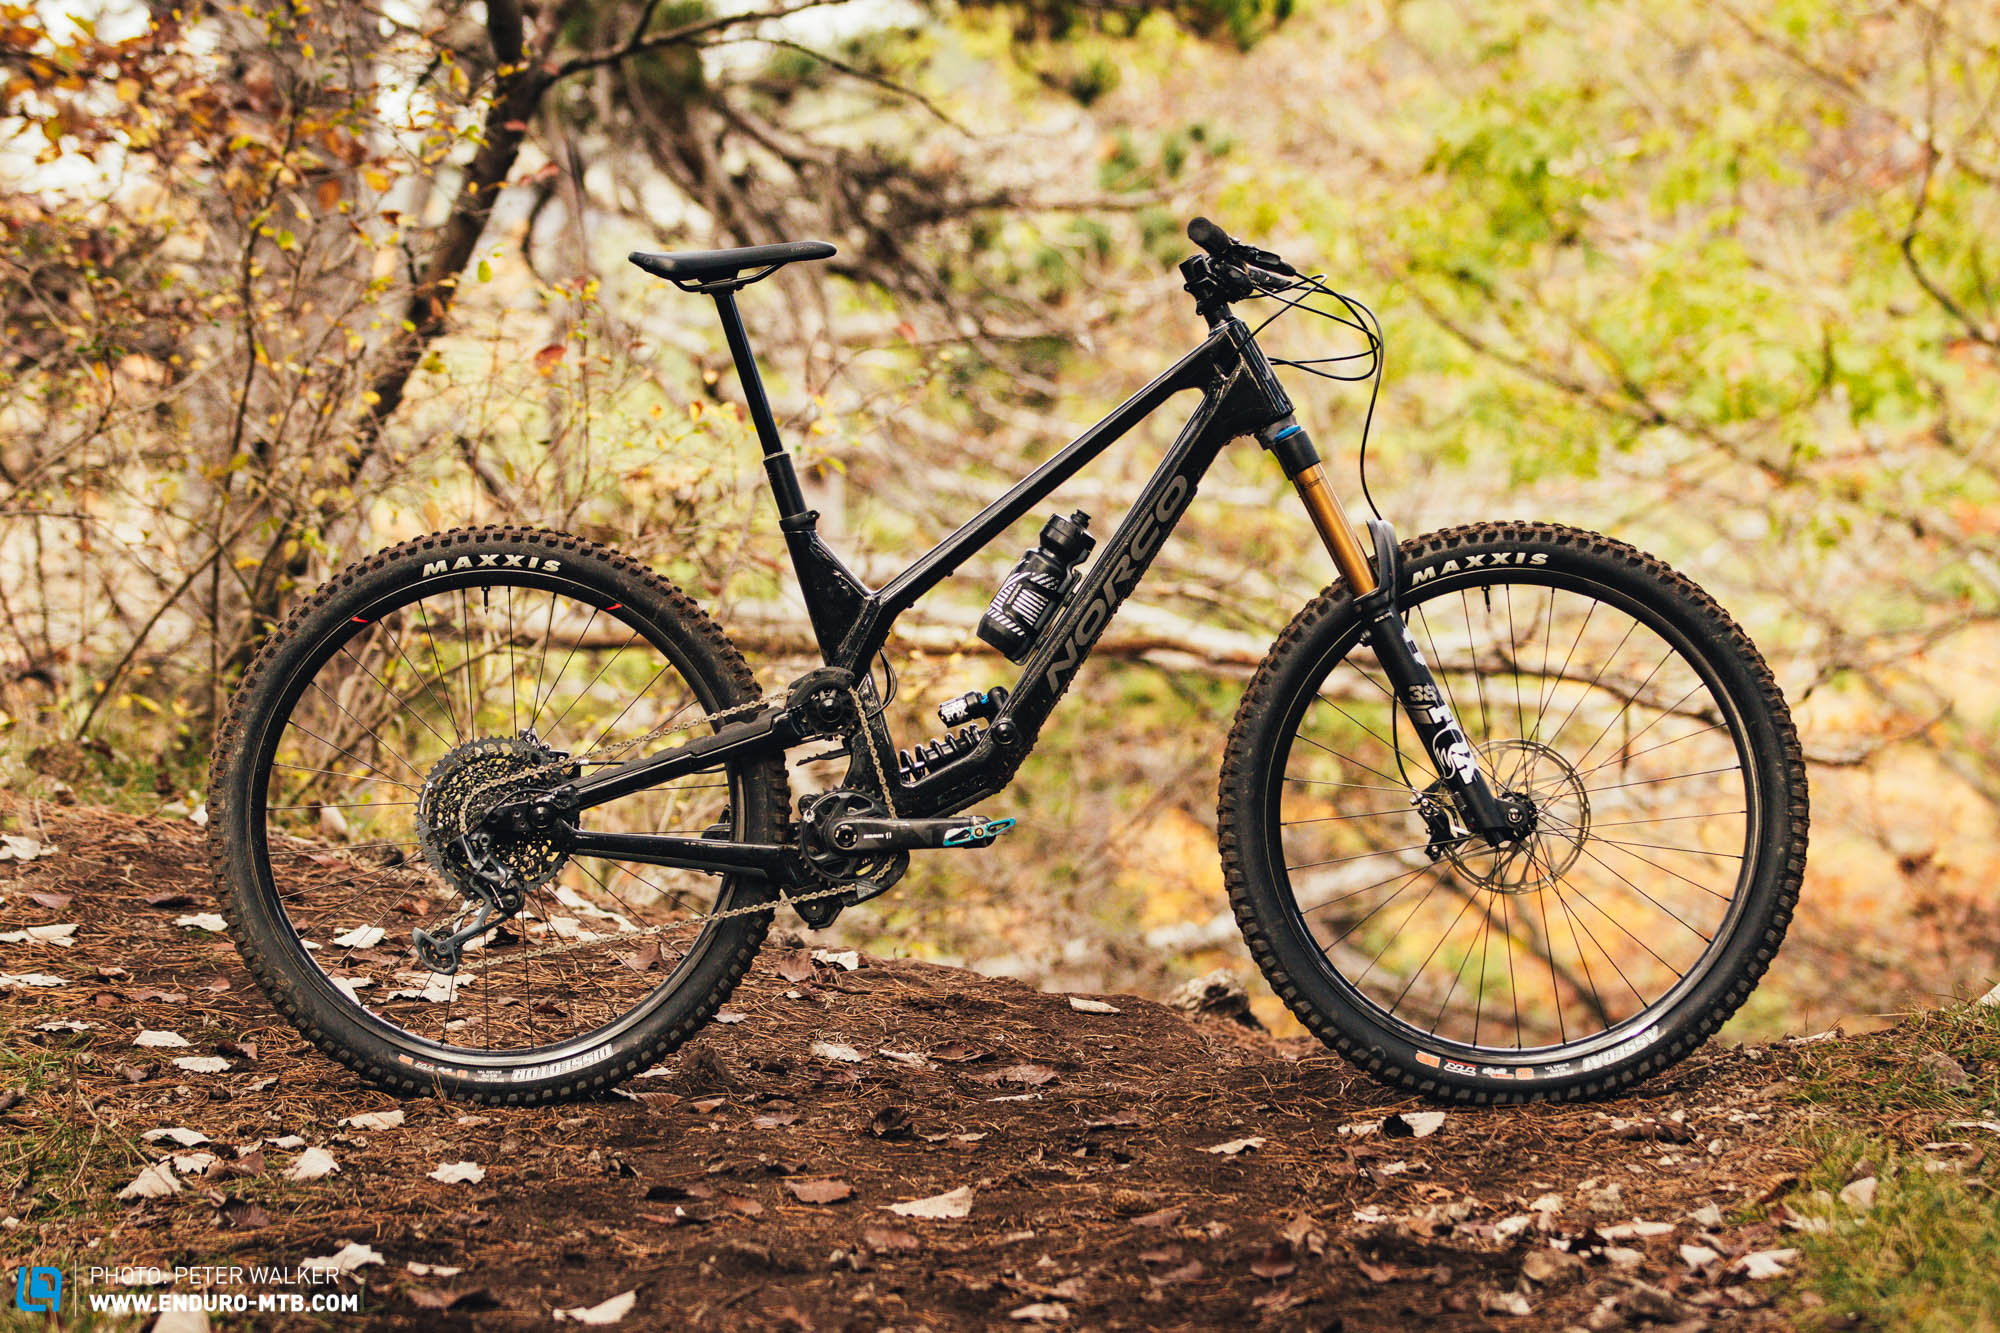 The Norco Range C1 – In our big 2023 enduro bike group test